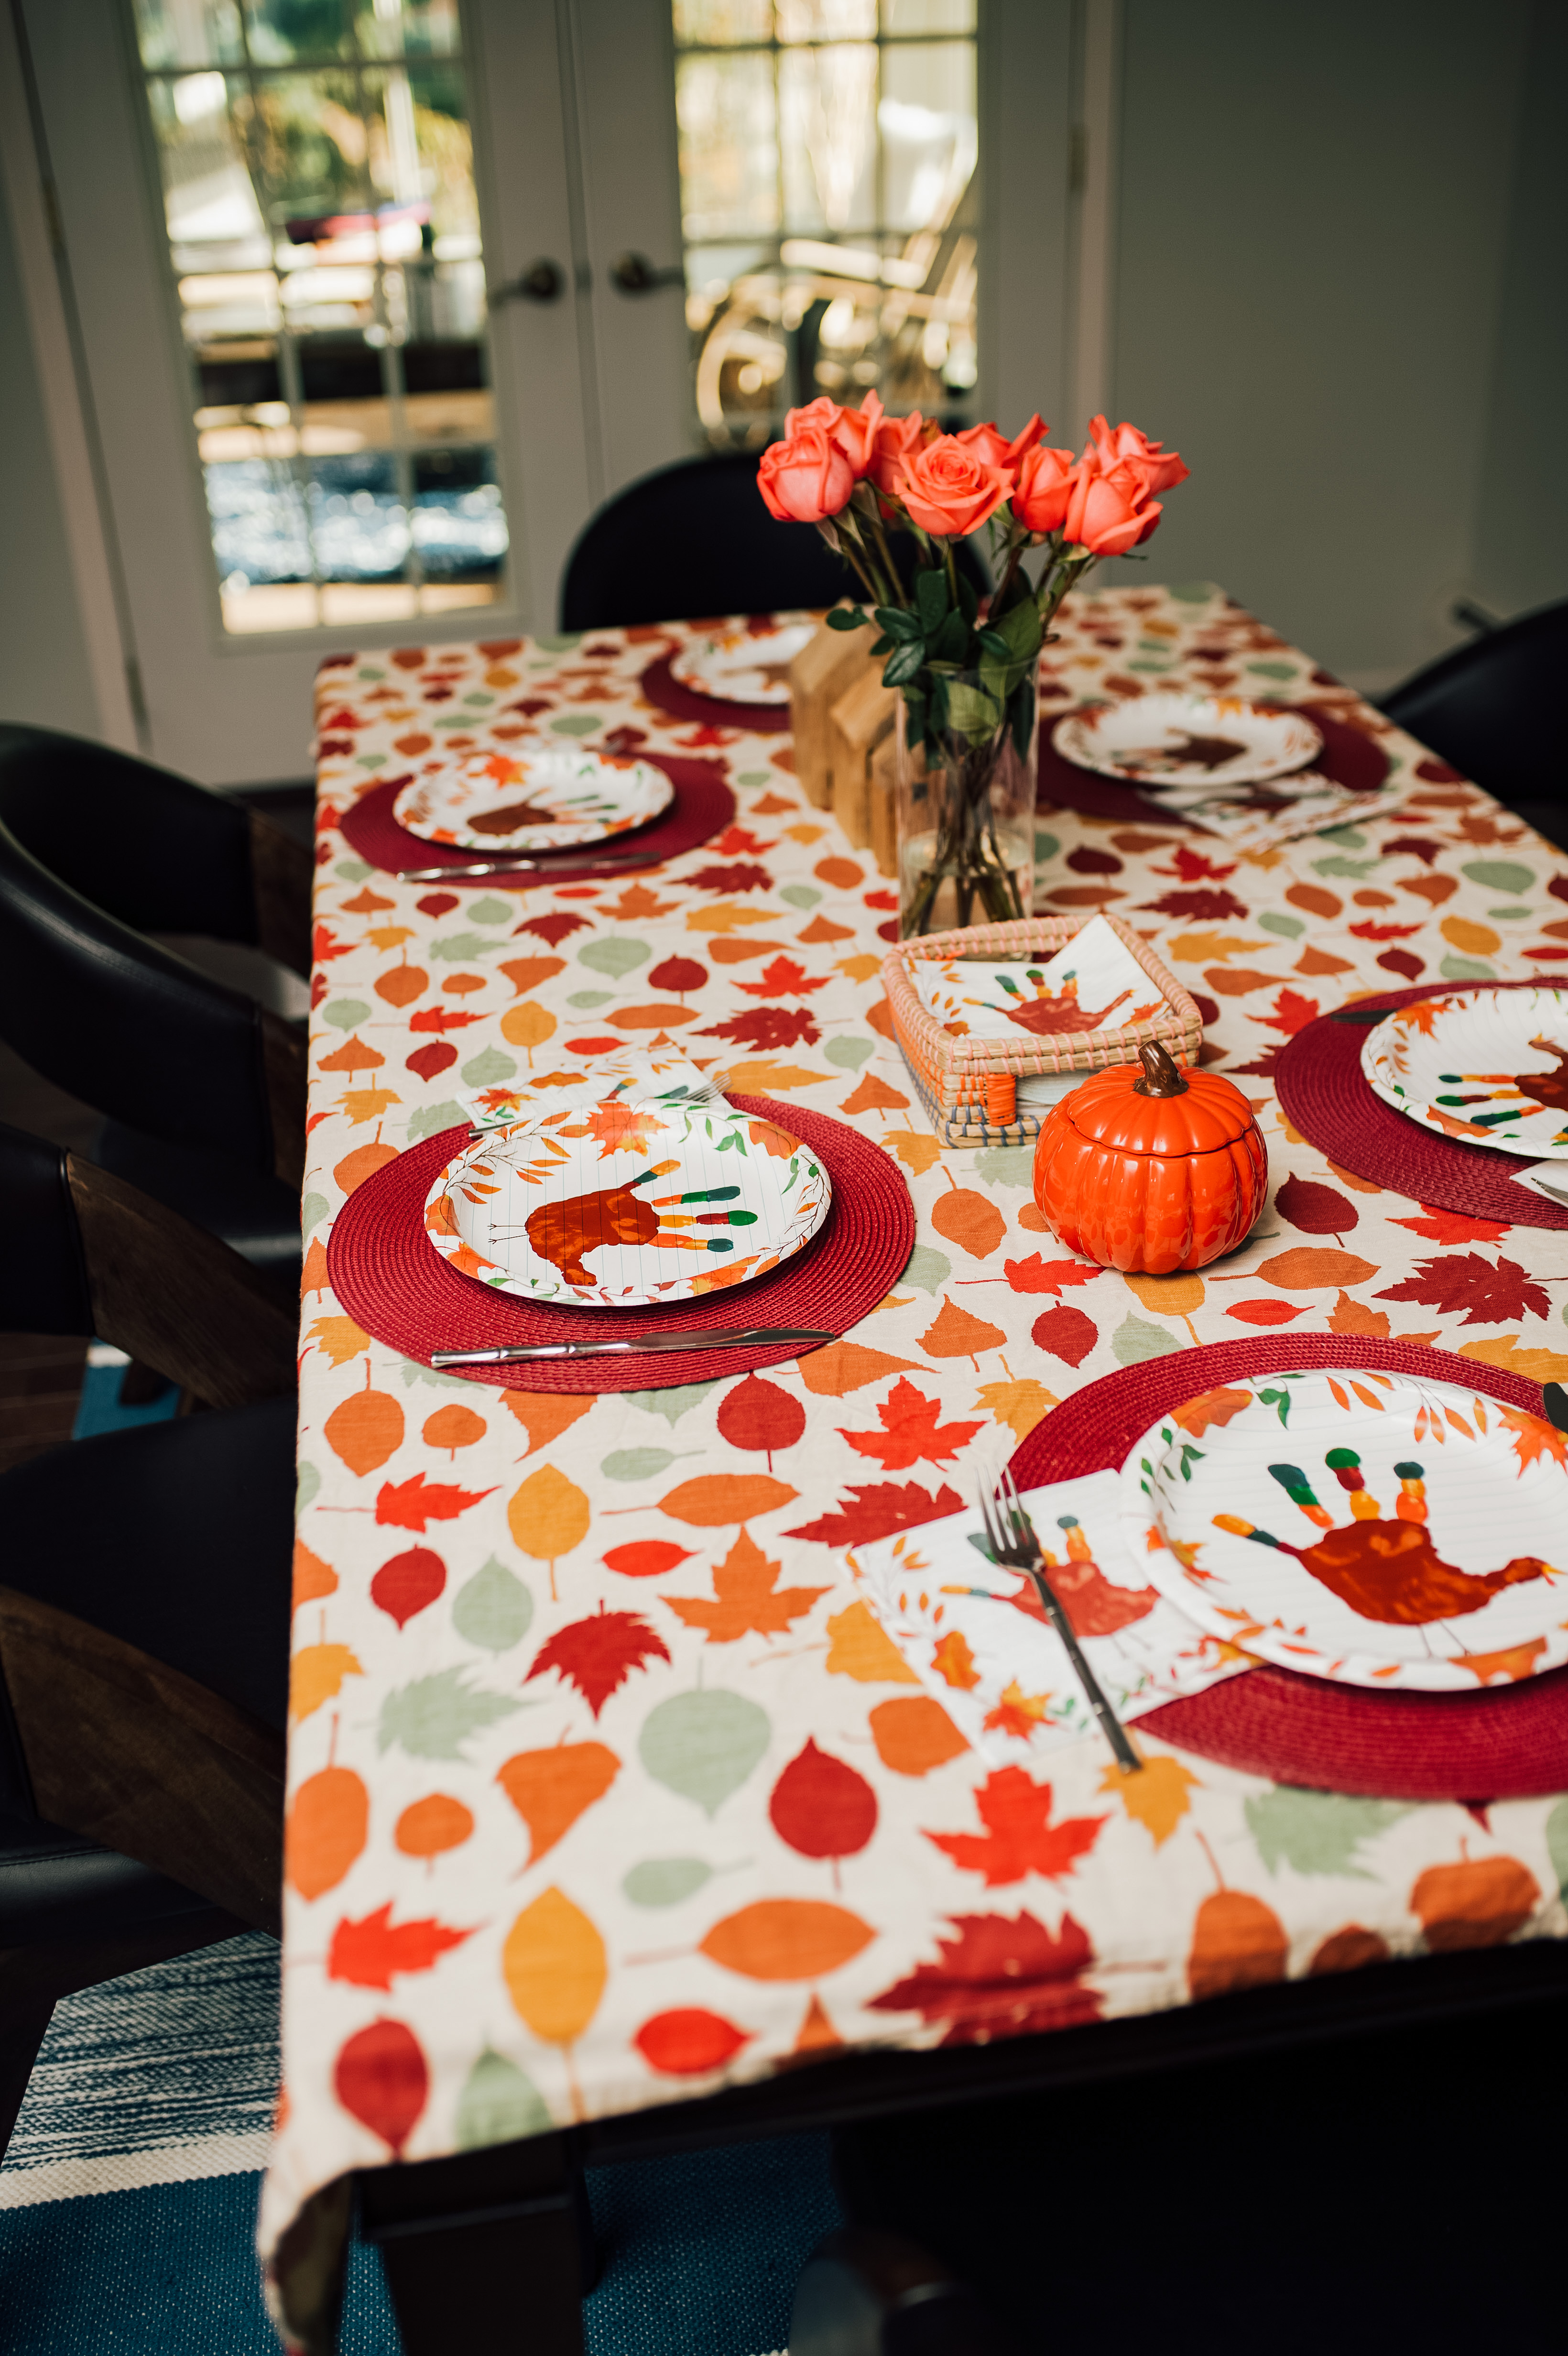 Our Thanksgiving Table | What's For Dinner Esq.